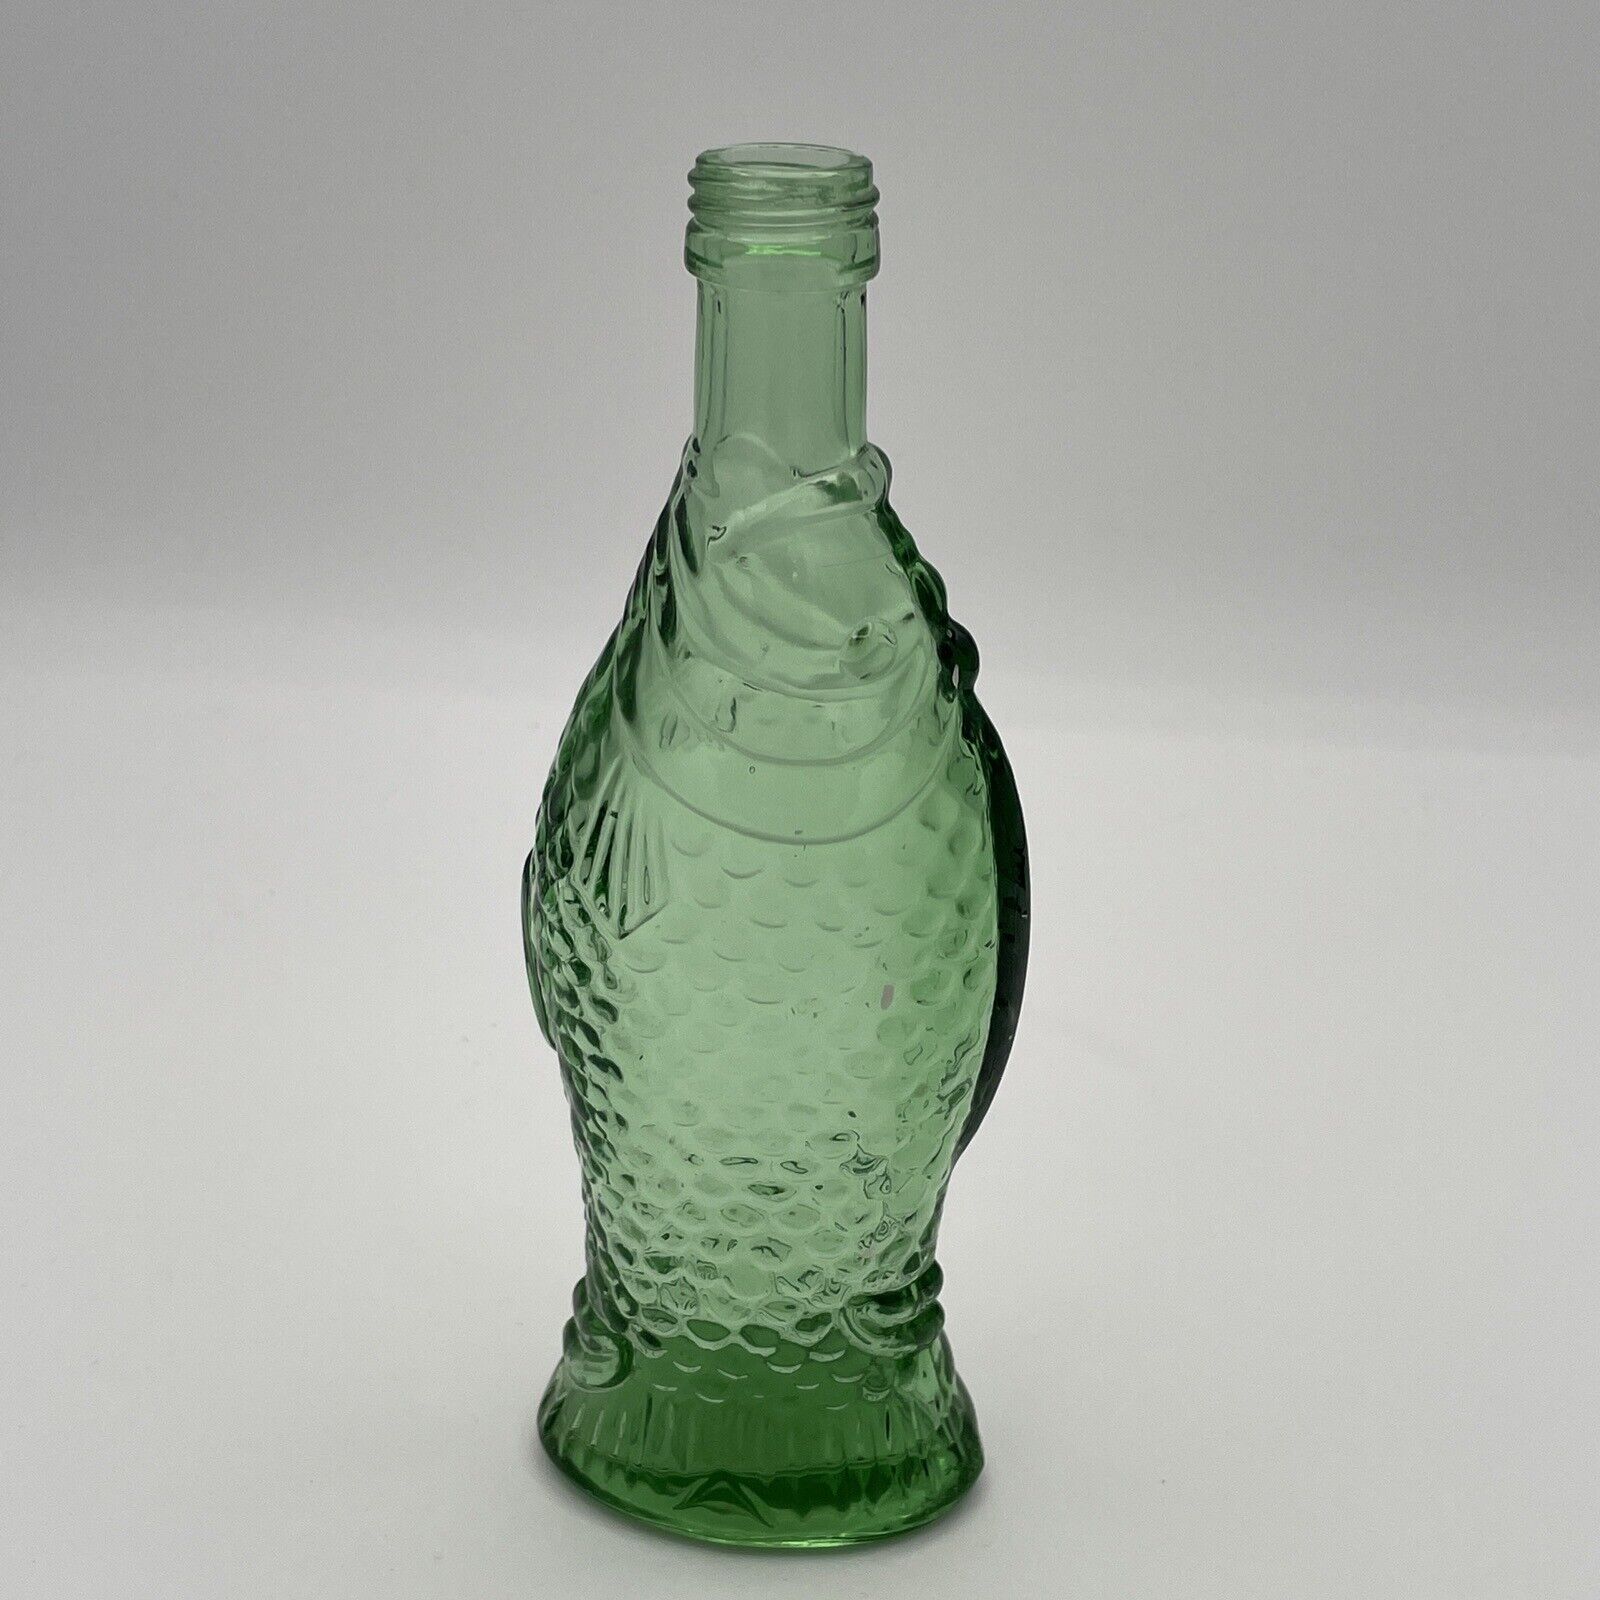 Vintage Glass Bottle Fish Shaped Green Ornate Decanter 7-3/4” Tall 3” Italy